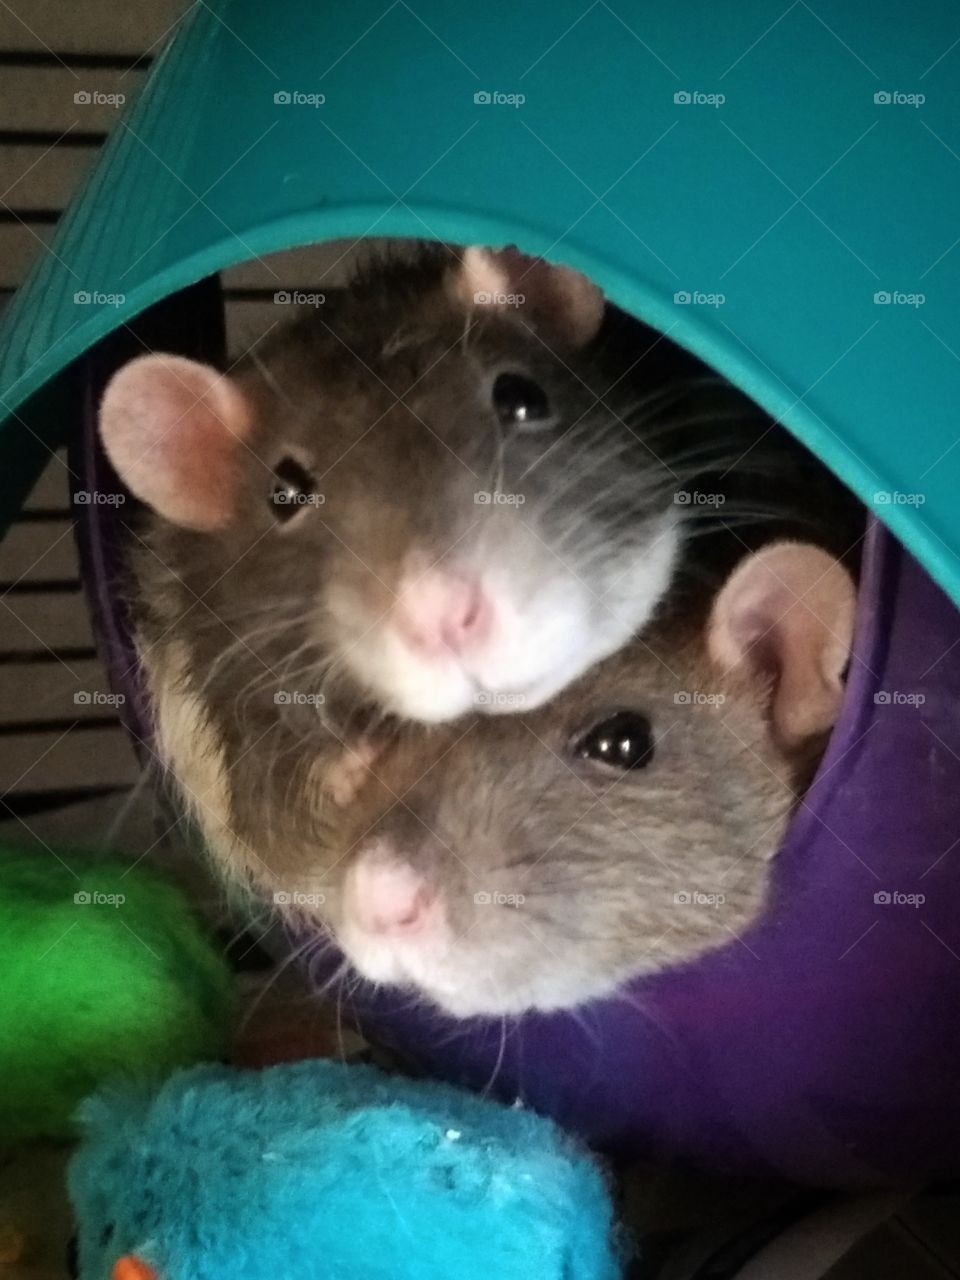 Ellie and Mattie snuggled up together in their space pod.  My cute pet rats.